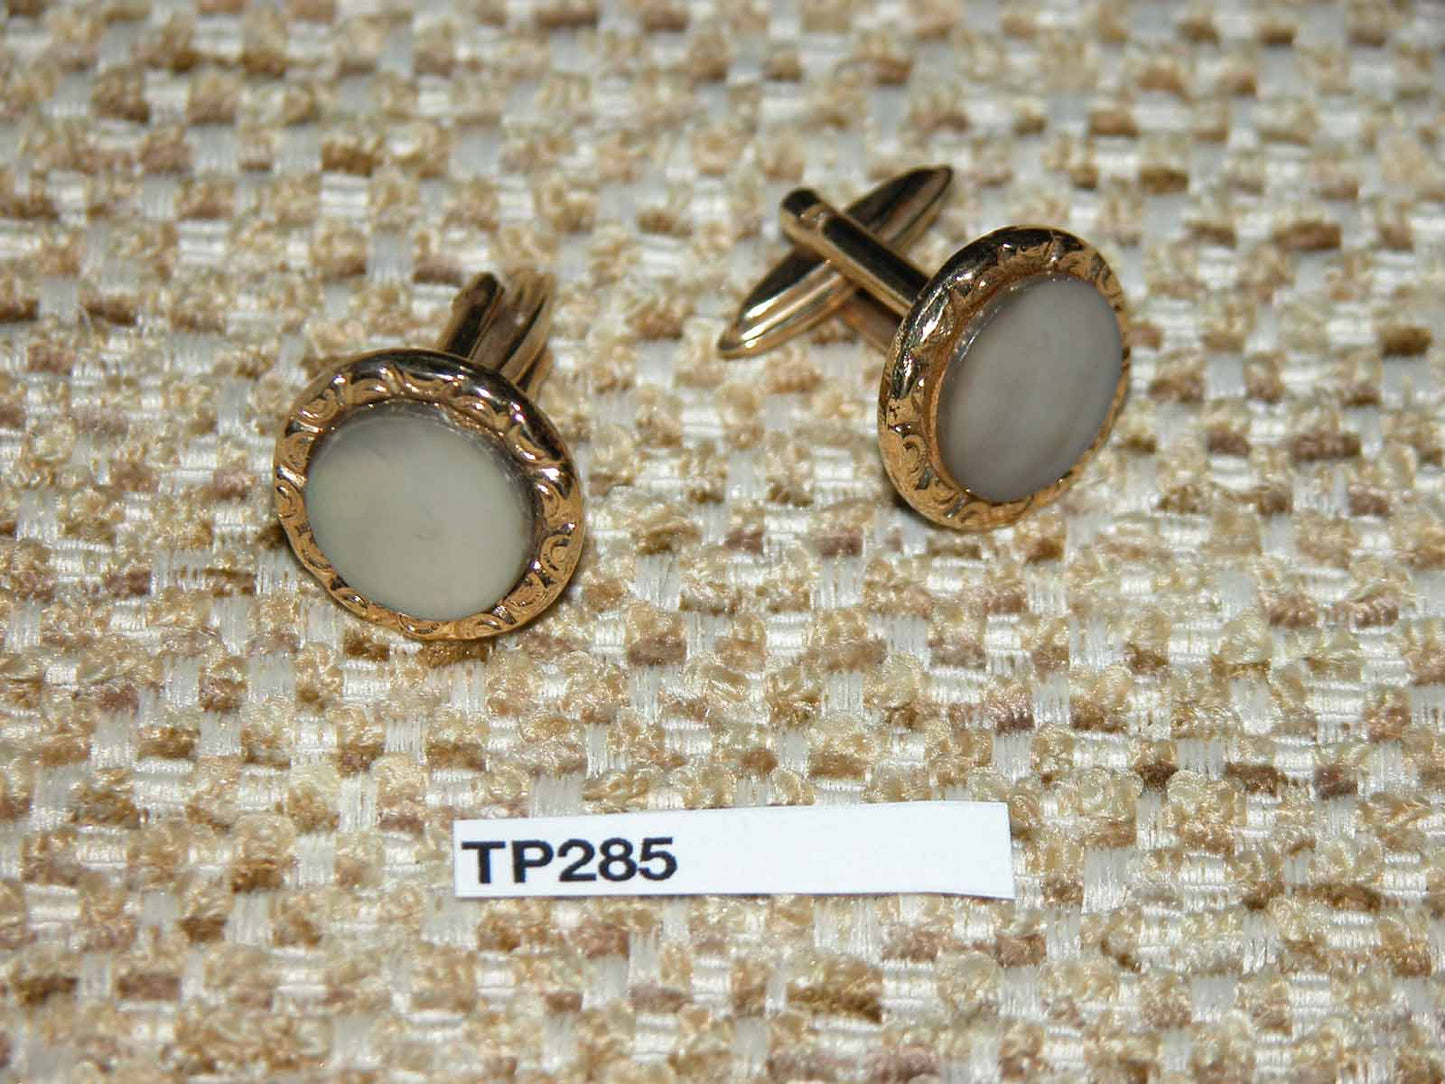 Vintage Cuff Links Gold Metal Grey Pearlised Glass Button Setting